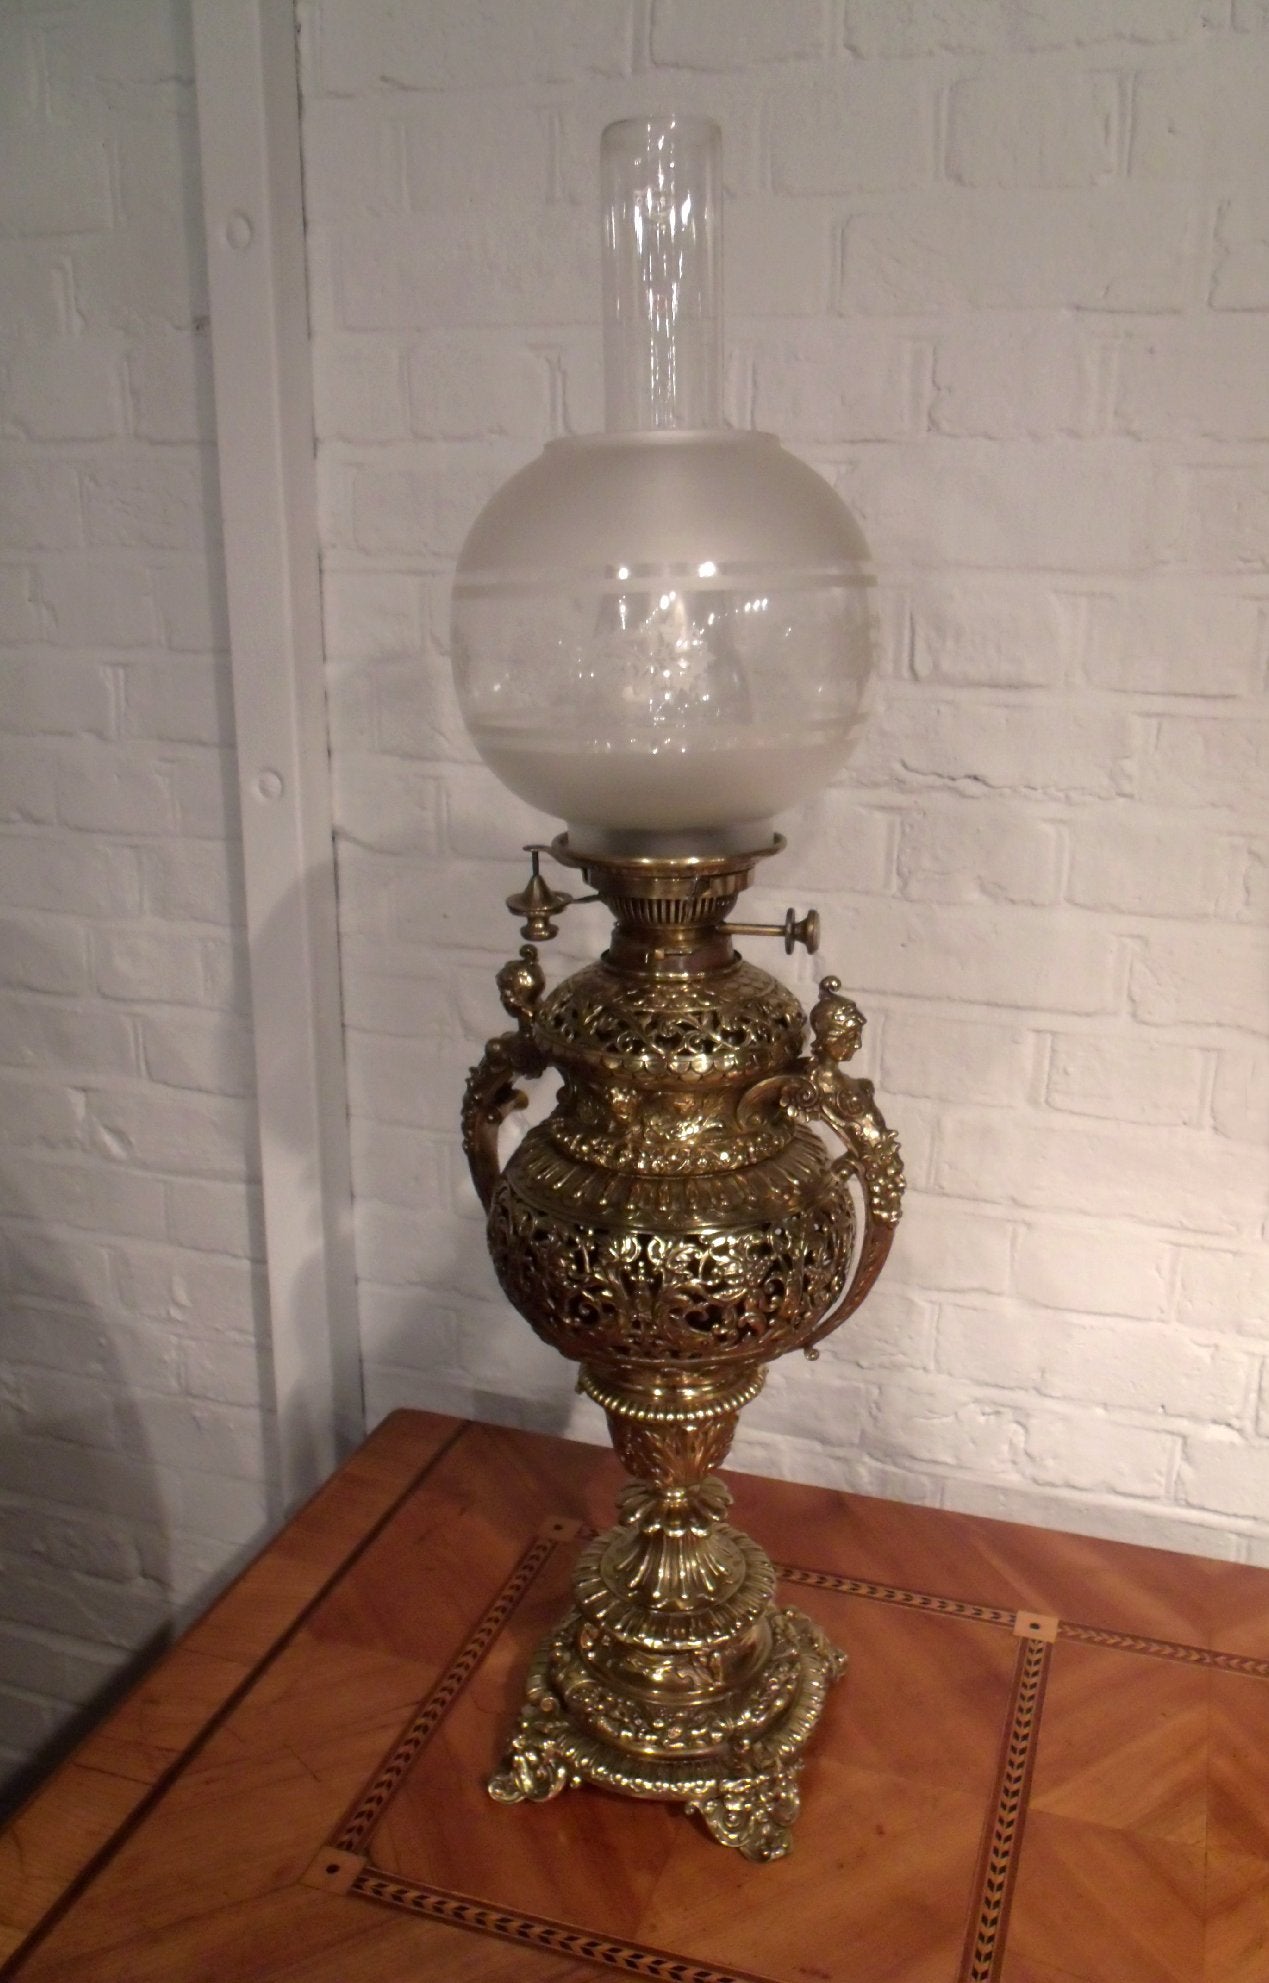 This beautiful Victorian brass oil lamp is a superb example of the period. The lamp base and body display an intricate and very ornate design of scrollwork and piercing. Each side is flanked by a centaur shaped handle, and along with the standard